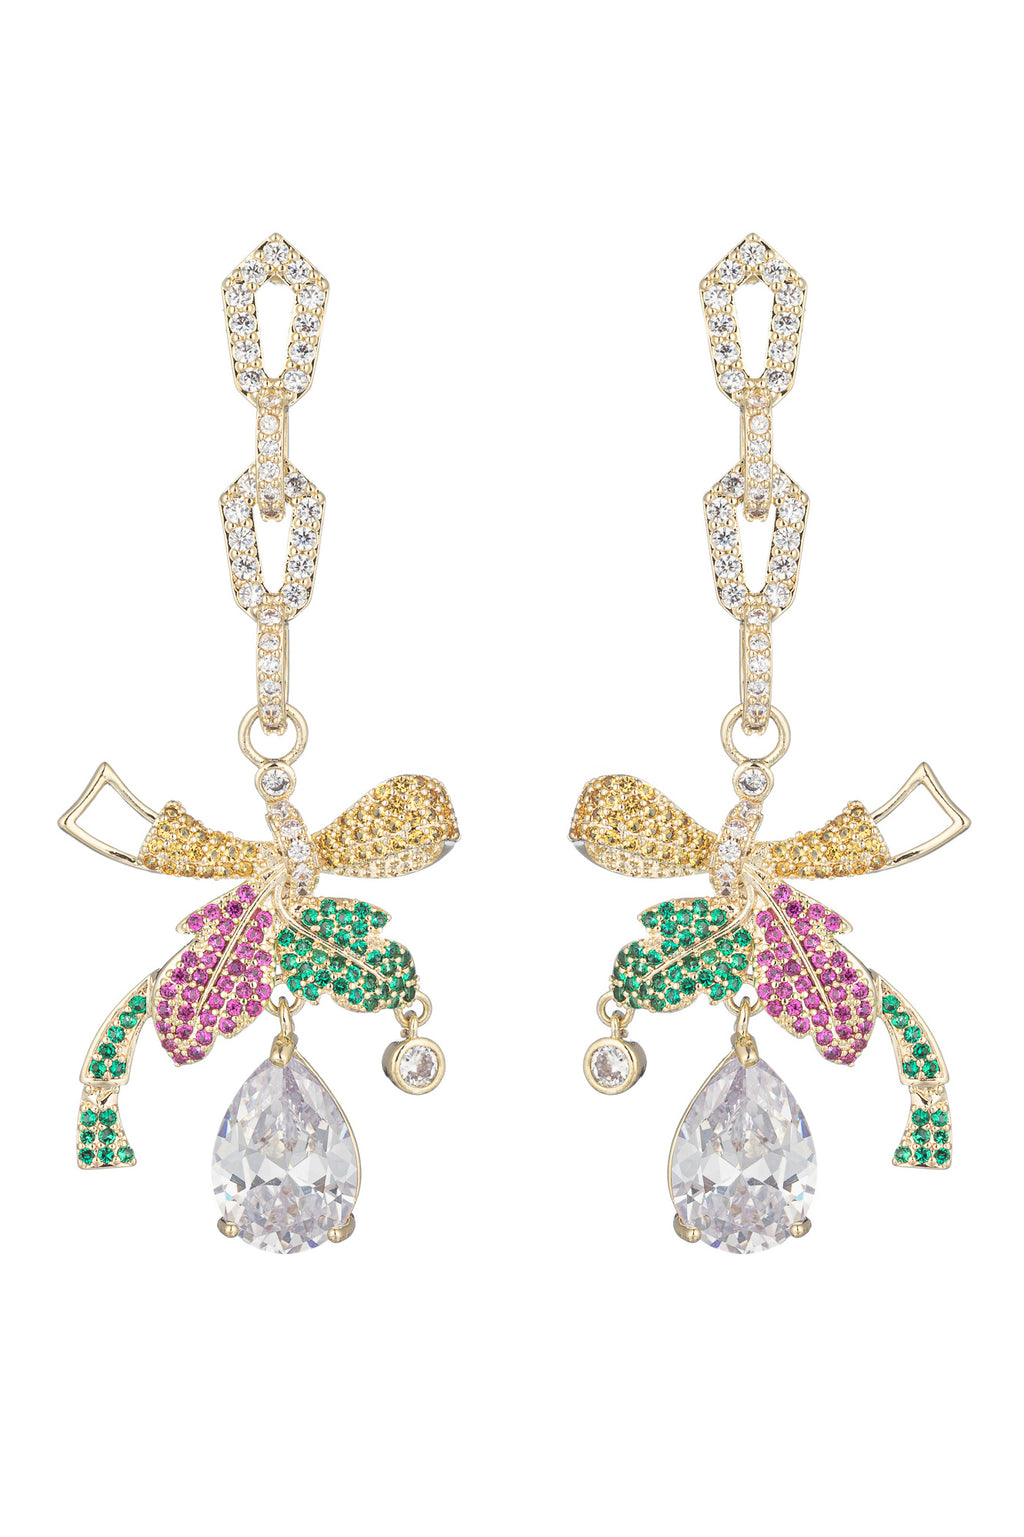 Gold tone brass bow earrings studded with rainbow CZ crystals.